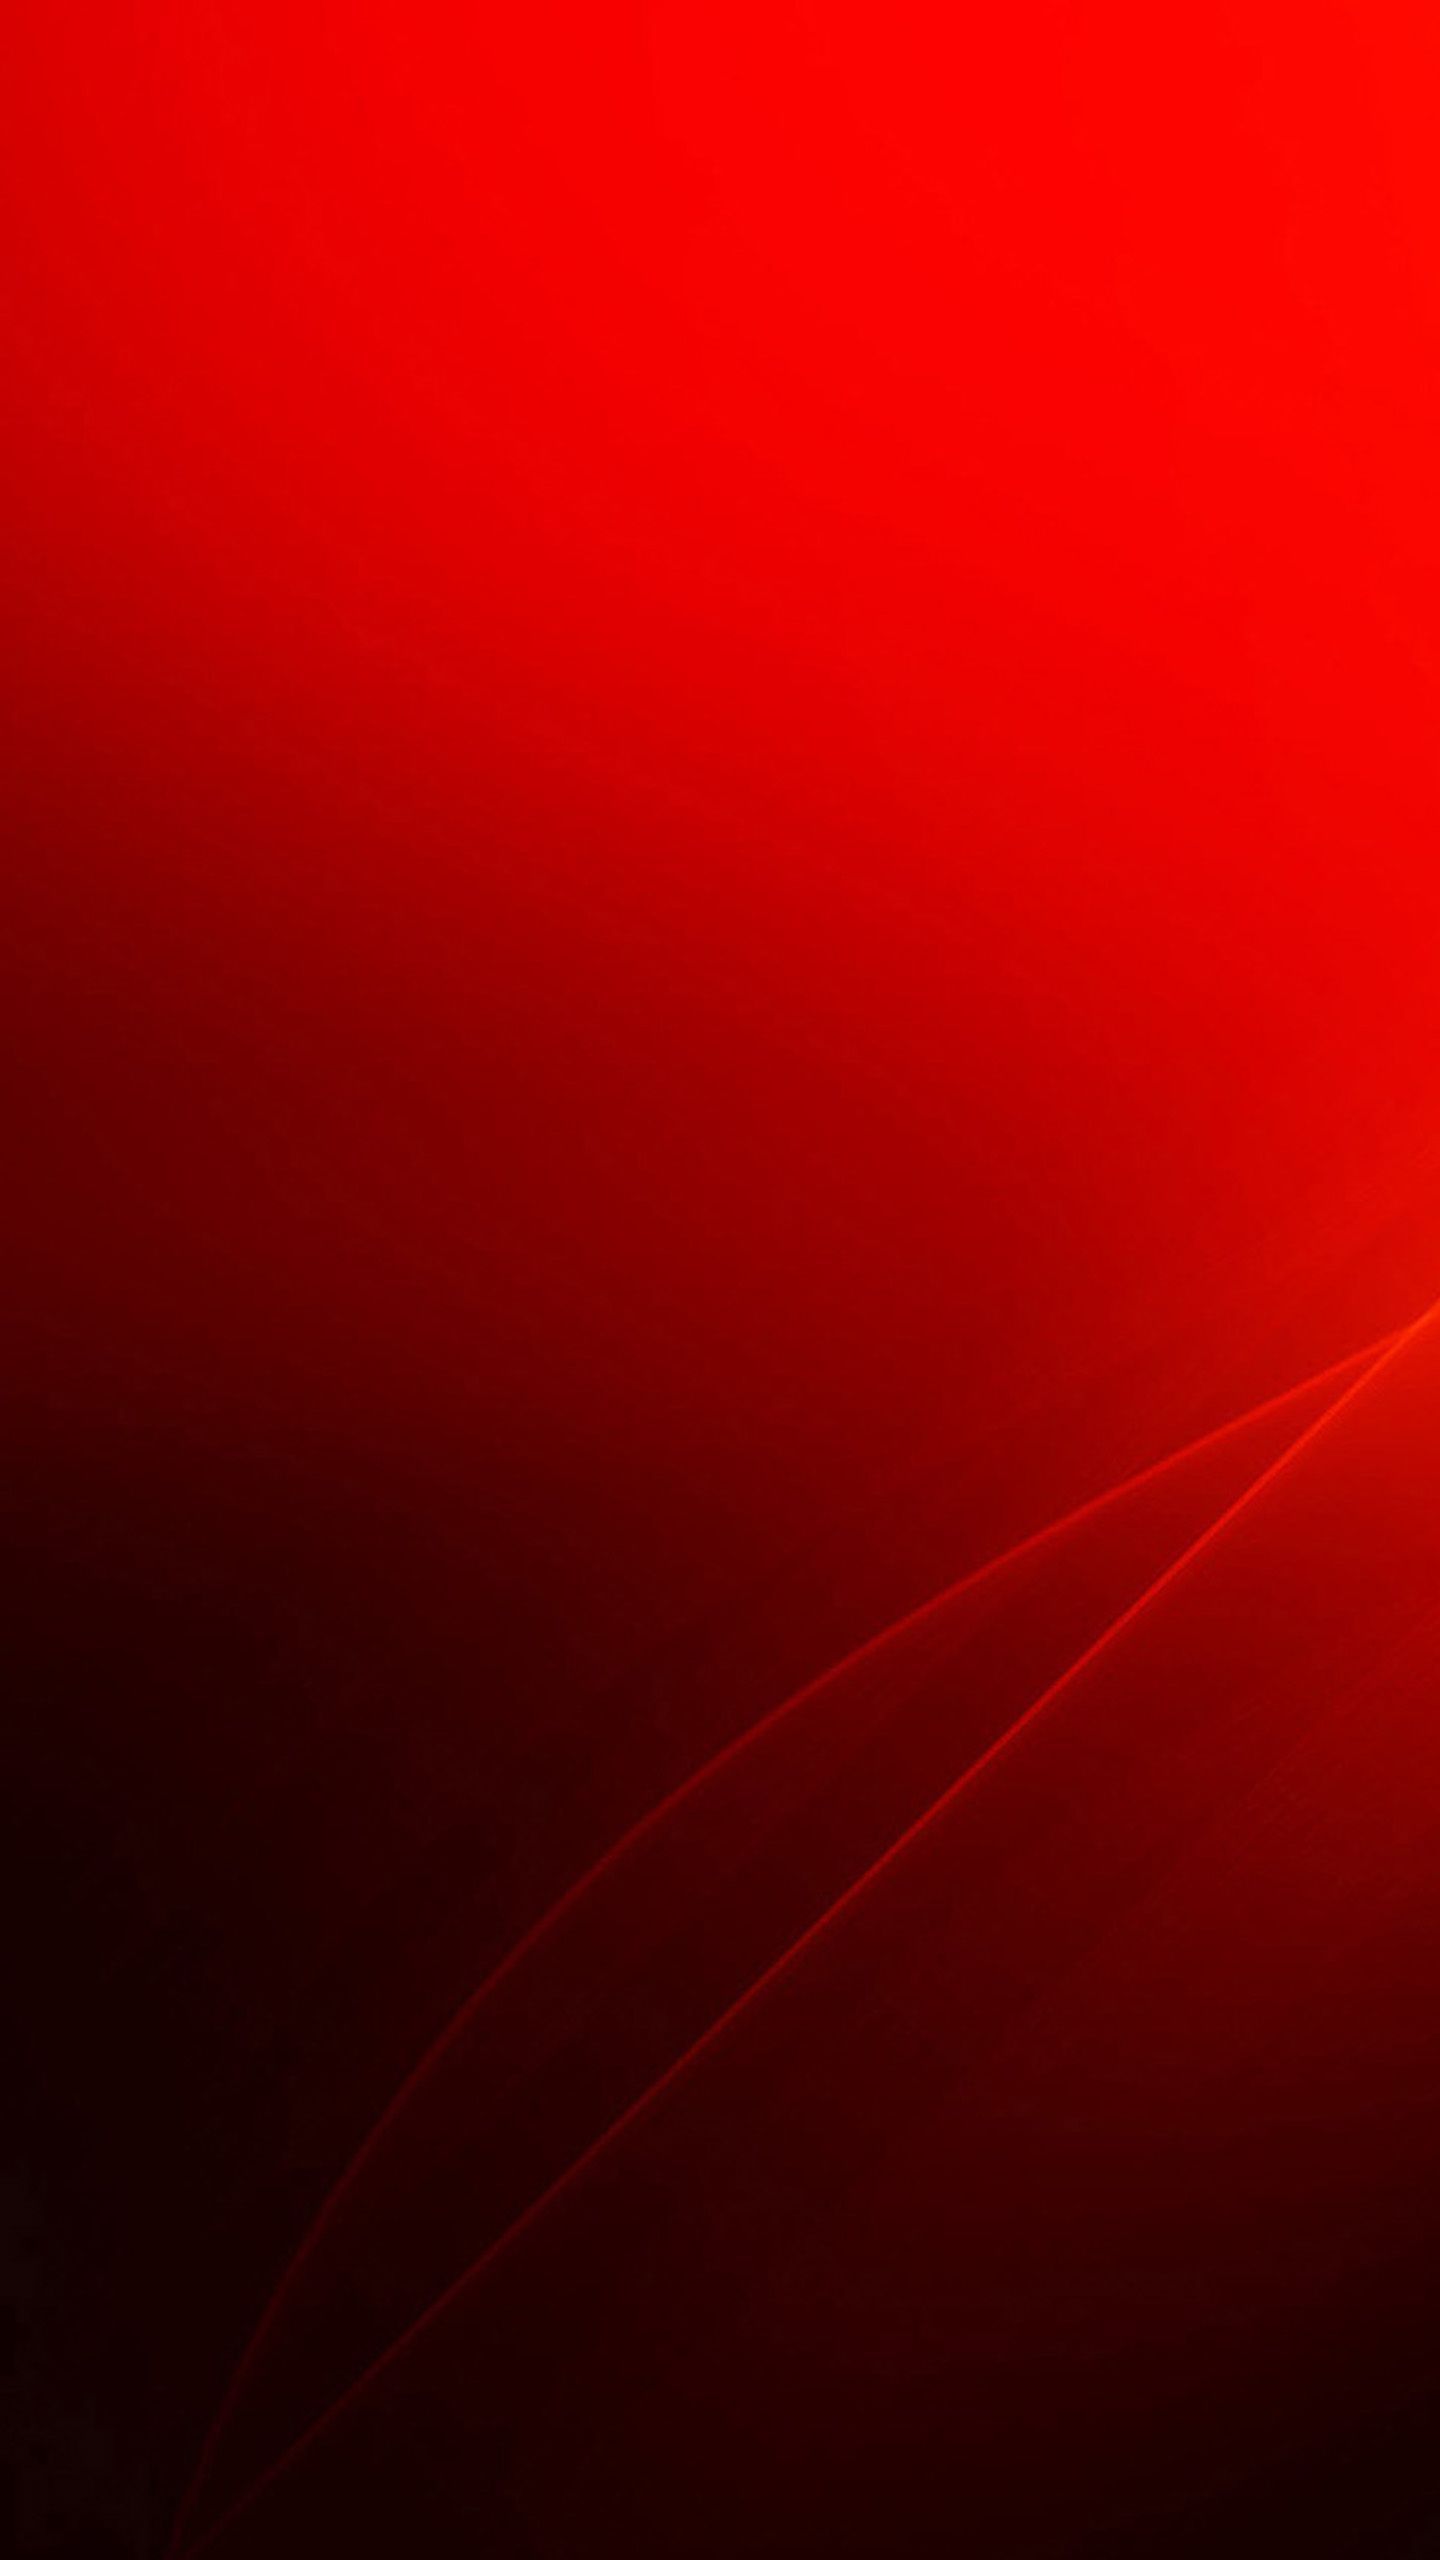 Red Abstract Mobile Phone Wallpaper